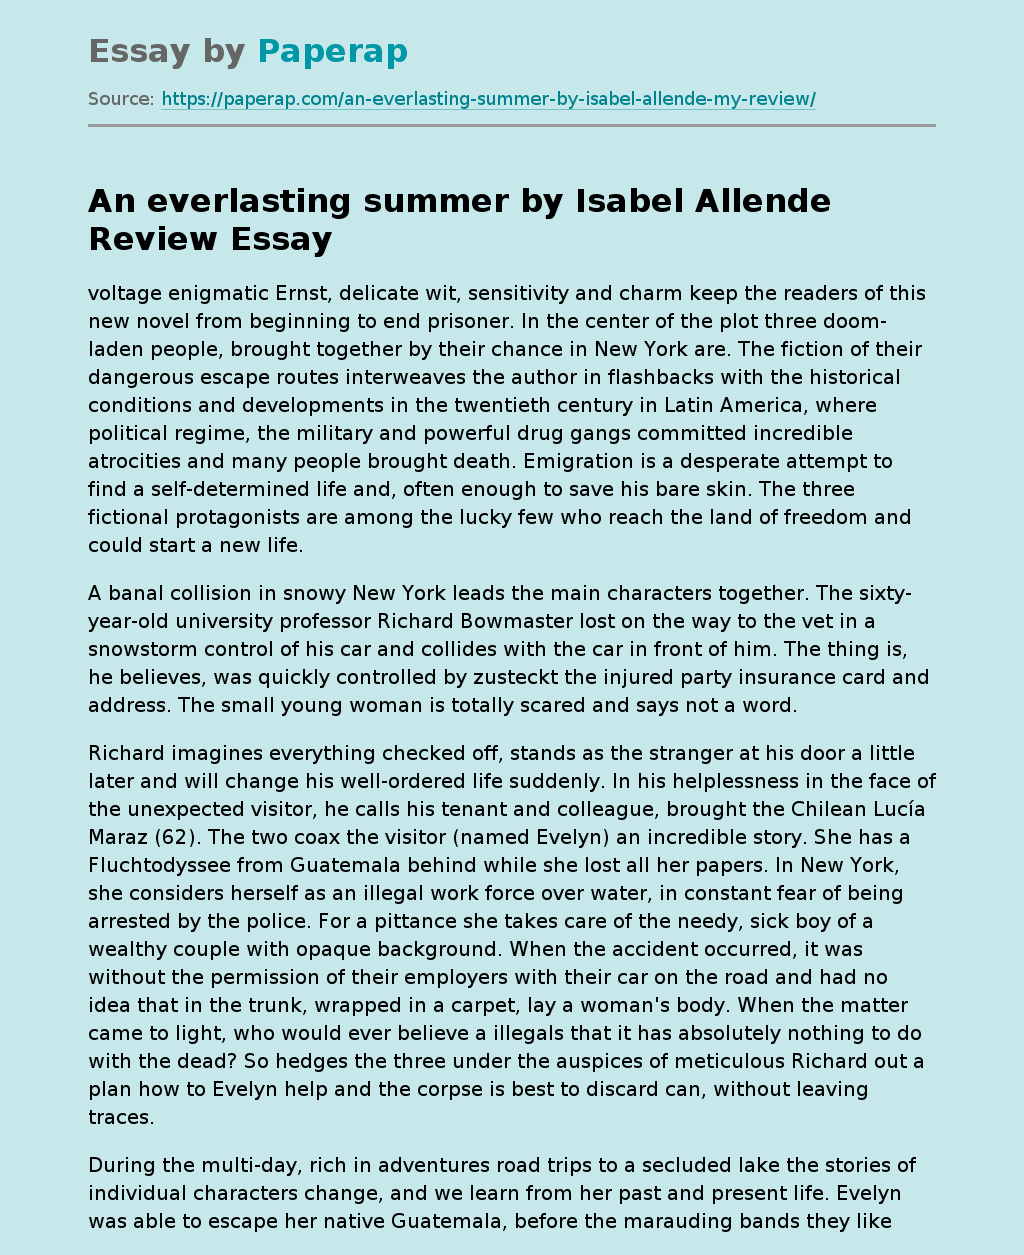 An everlasting summer by Isabel Allende Review